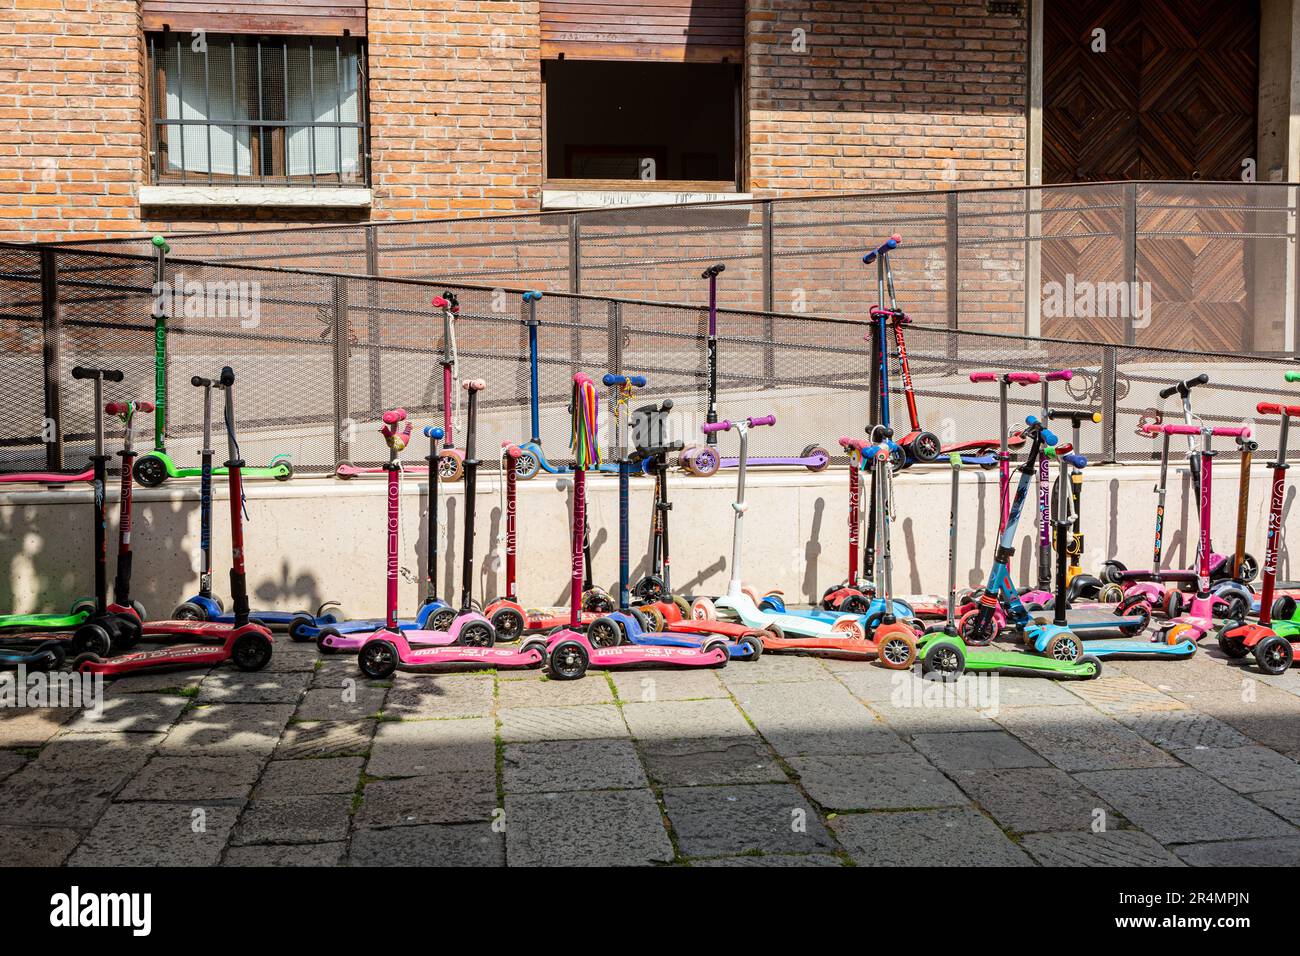 Children's scooters parked outside a Junior school in Venice Stock Photo